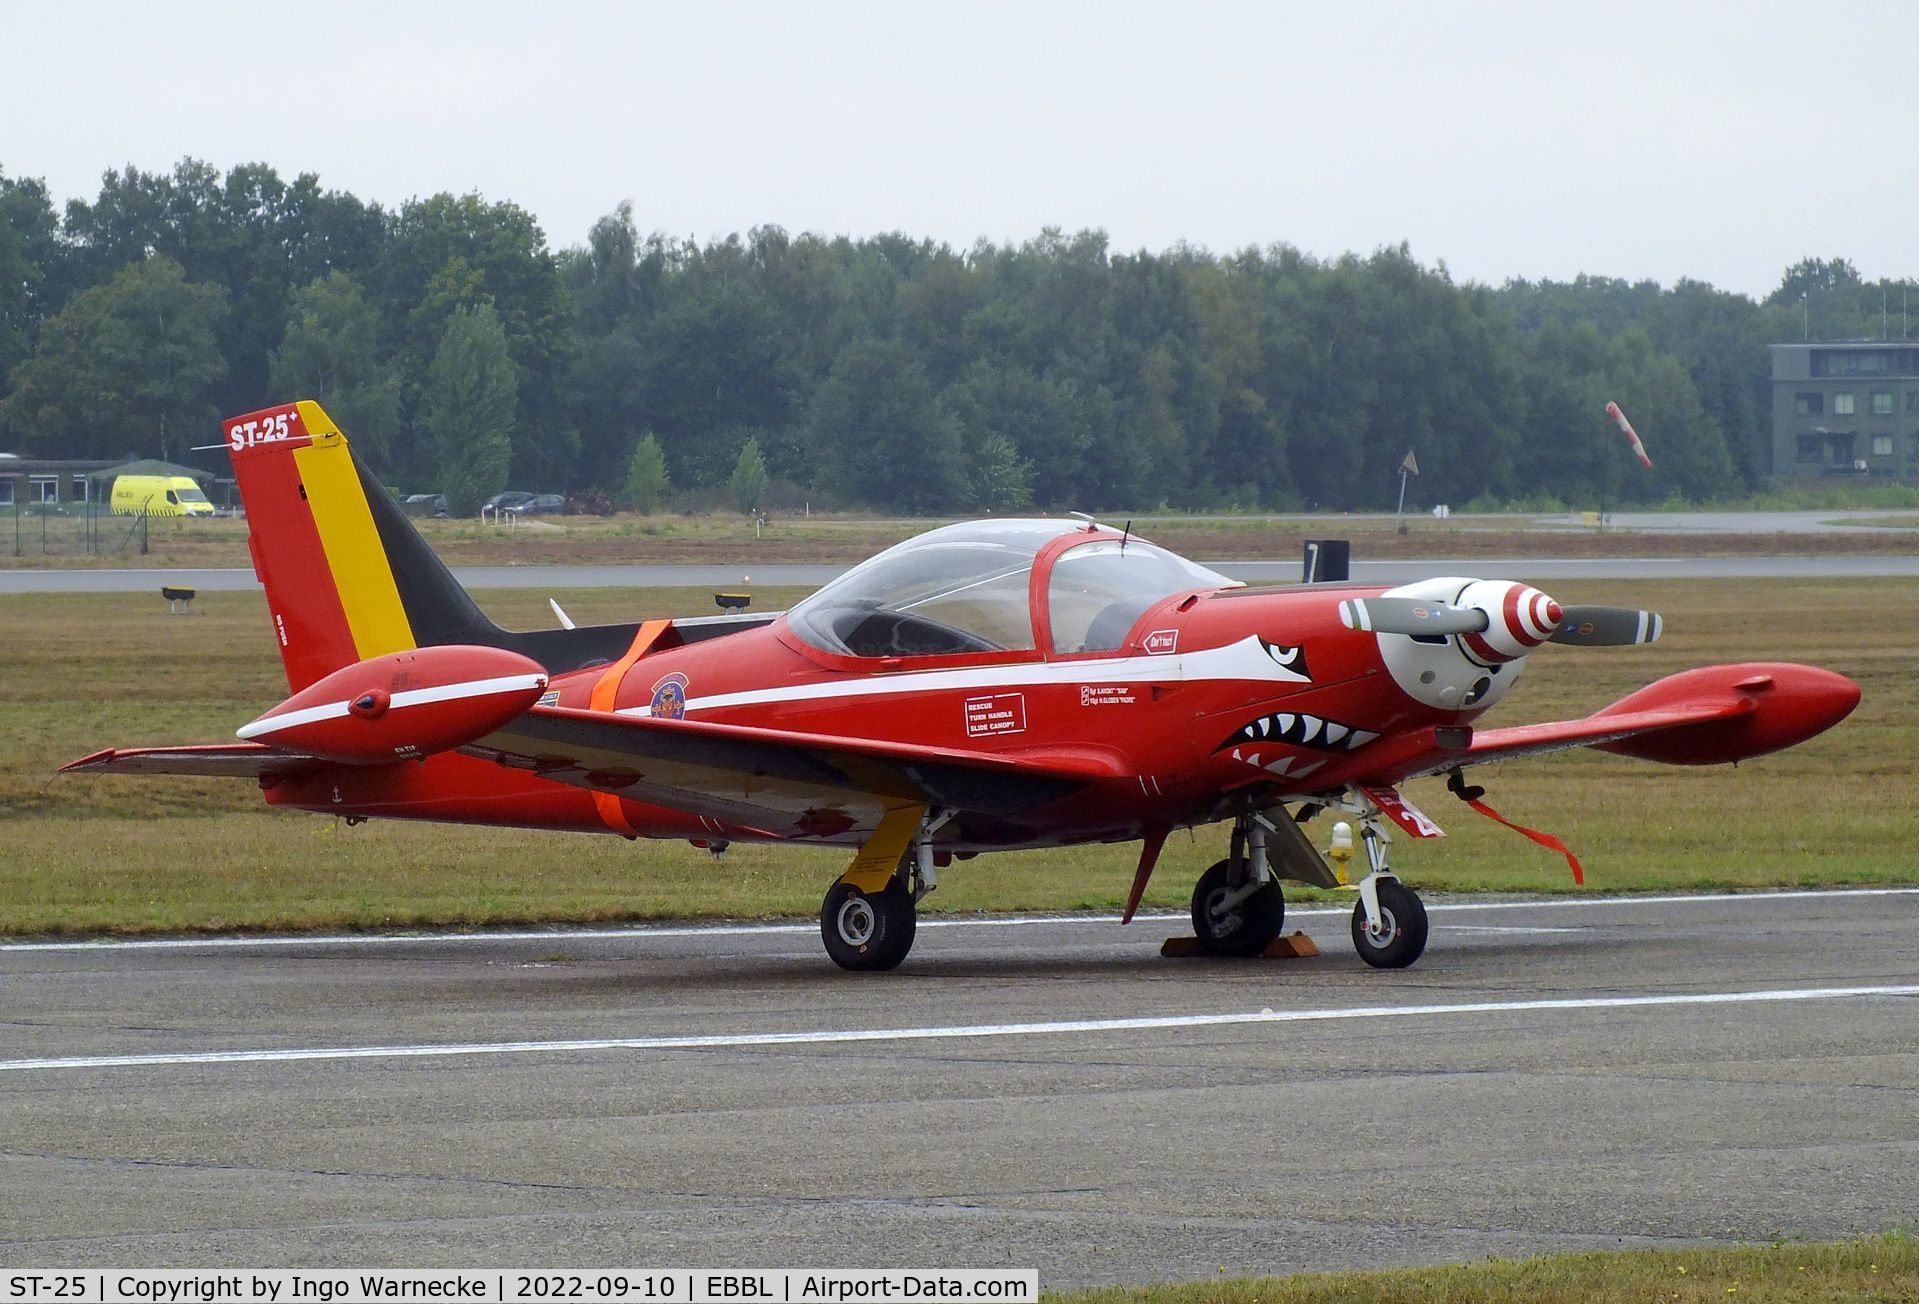 ST-25, 1970 SIAI-Marchetti SF-260MB C/N 10-25, SIAI-Marchetti SF.260MB of the FAeB (Belgian Air Force) 'Diables Rouges / Red Devils' aerobatic team at the 2022 Sanicole Spottersday at Kleine Brogel air base